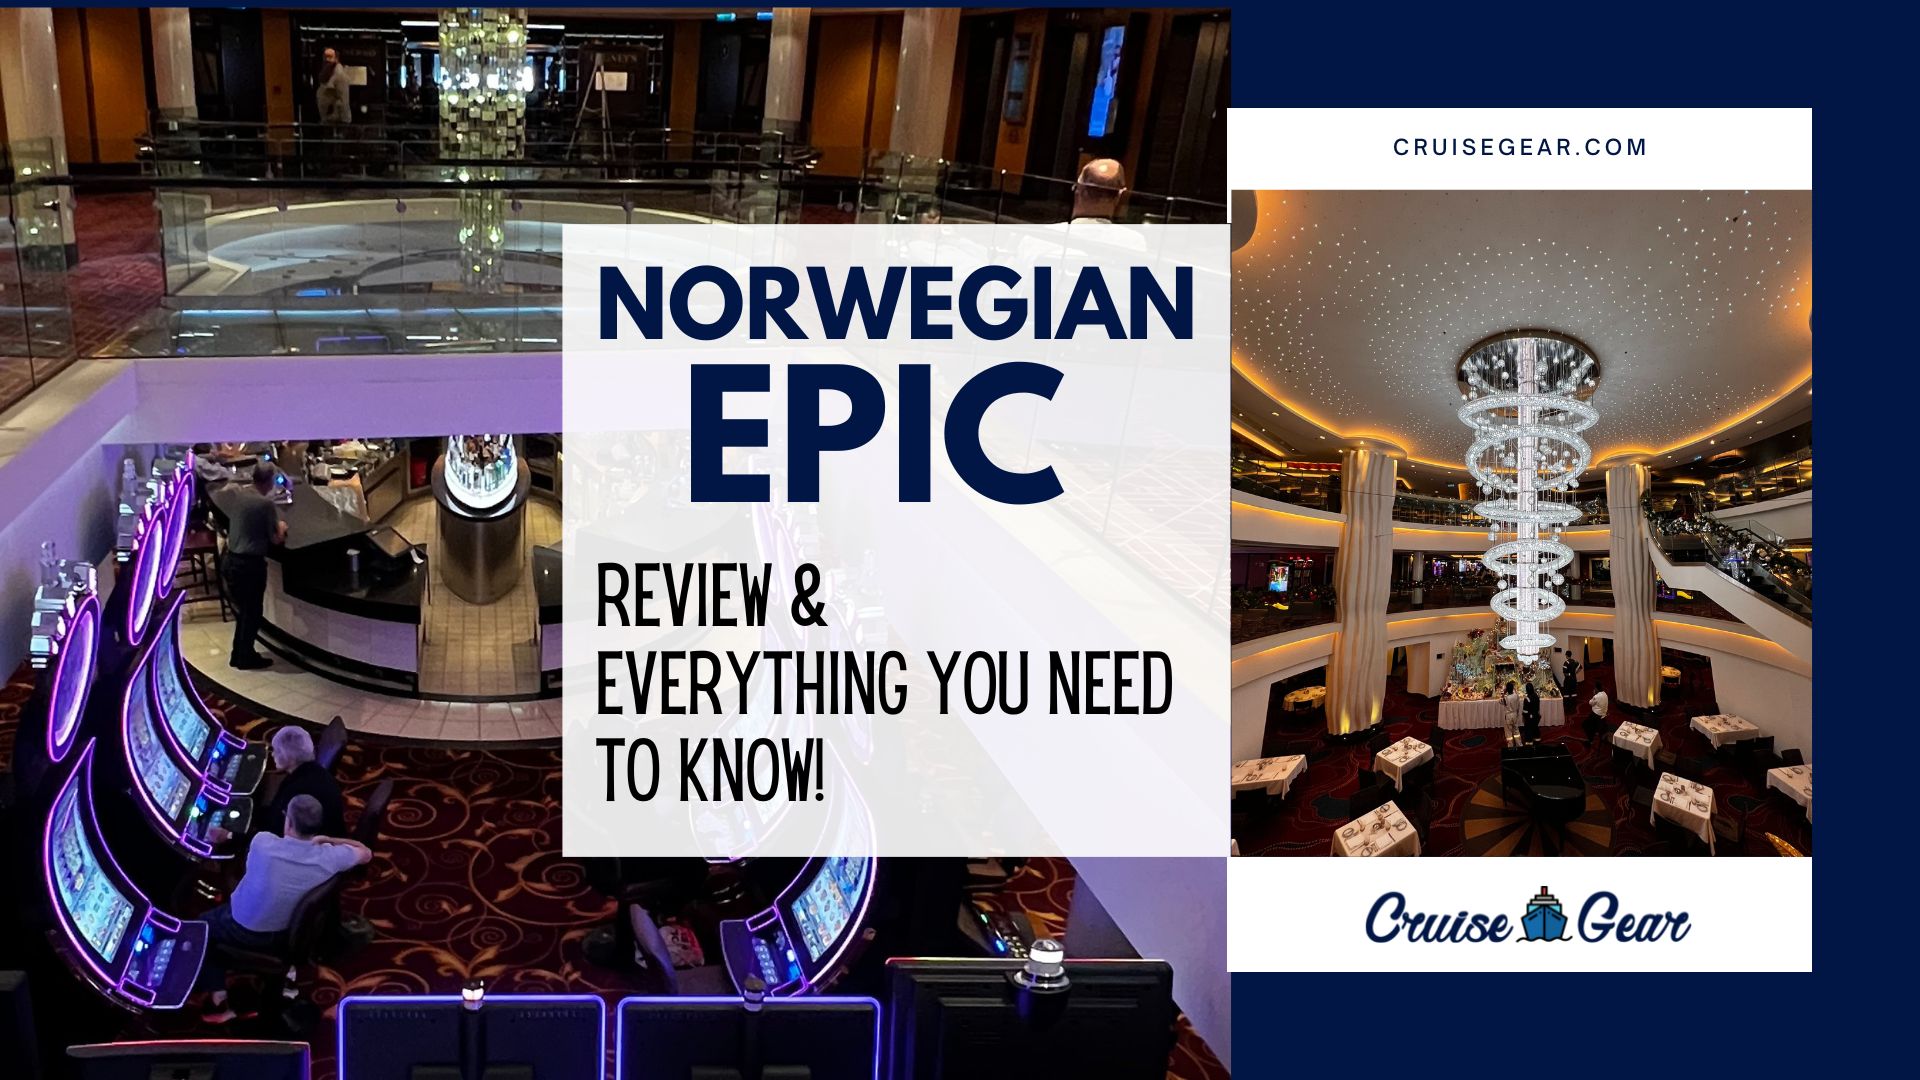 Norwegian Epic Review & everything you need to know 11